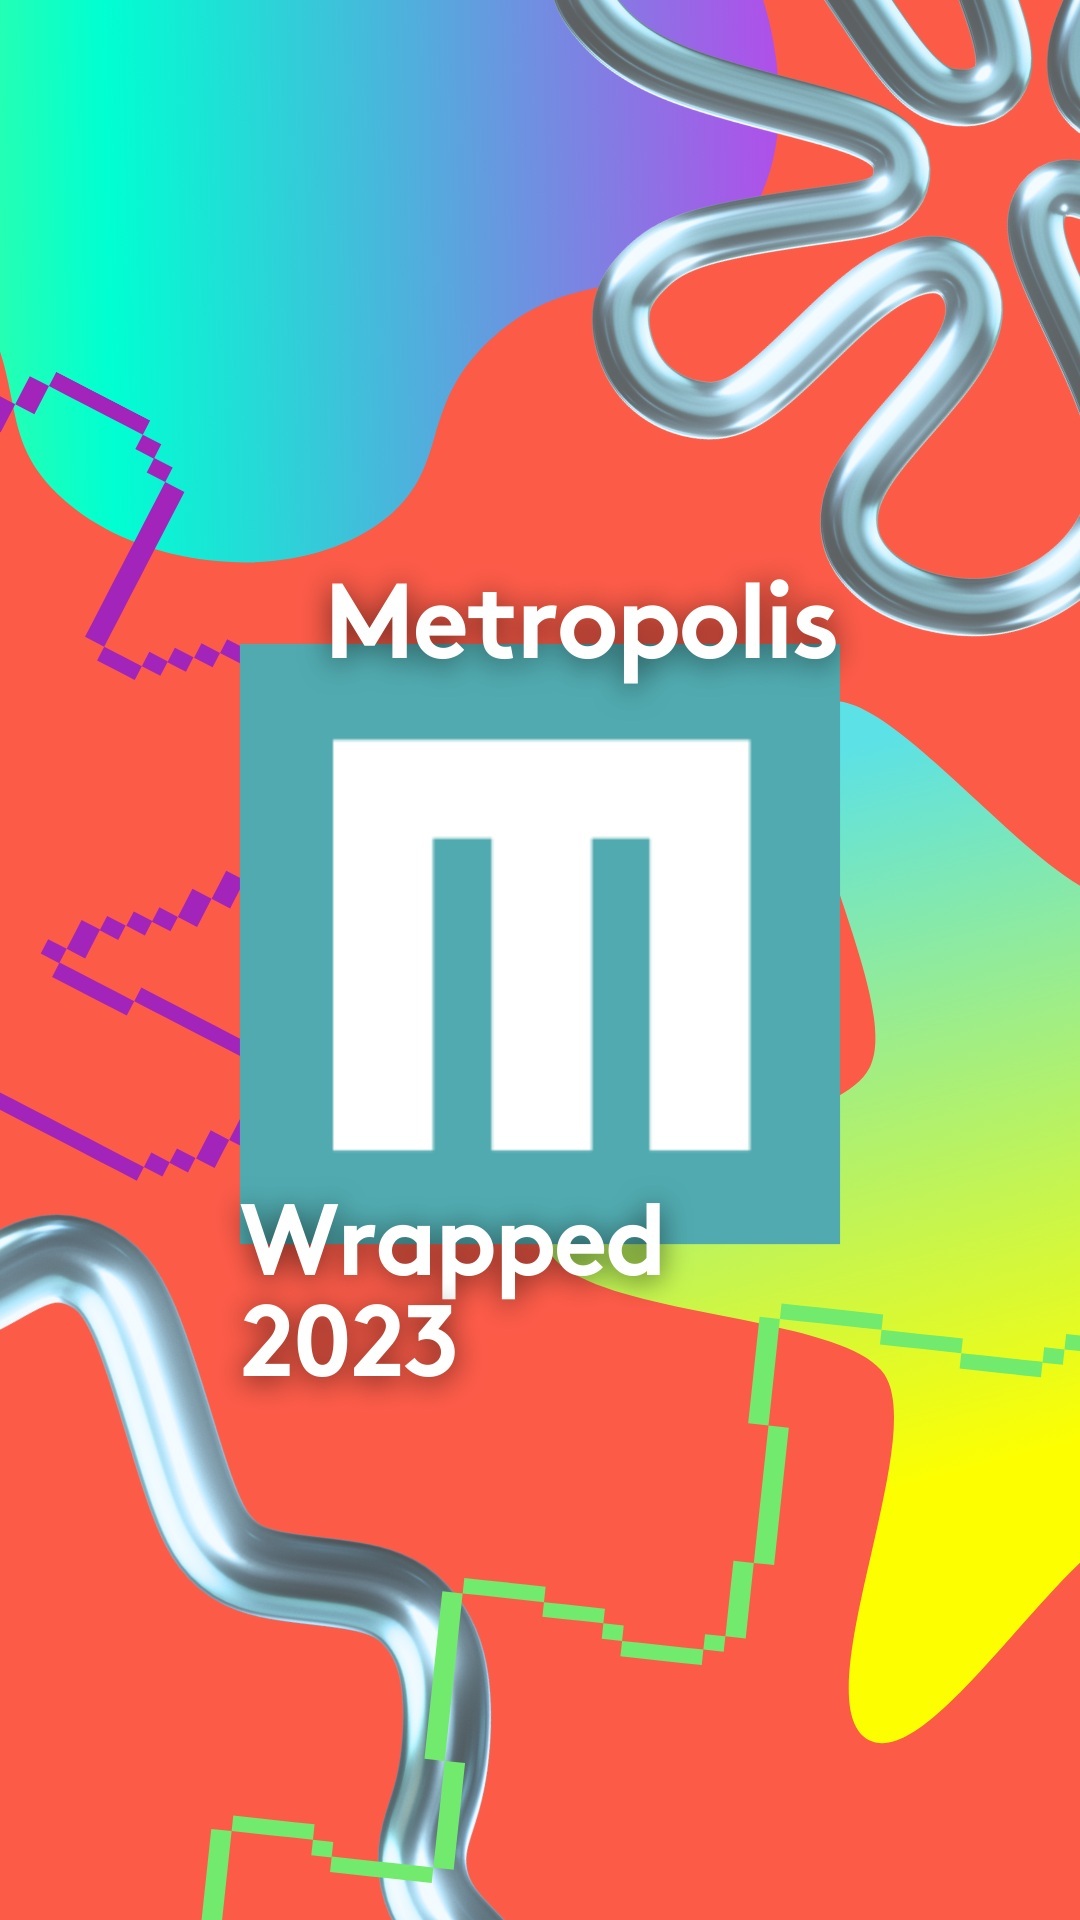 Want to know what we were up to over the last year?
See the last 12 months in 30 seconds through the 2023 Metropolis Wrapped!  

With a plethora of achievements and events — even some new additions, we are glad to have you all with us throughout the year.
2024 is bound to be just as, or maybe even more exciting!